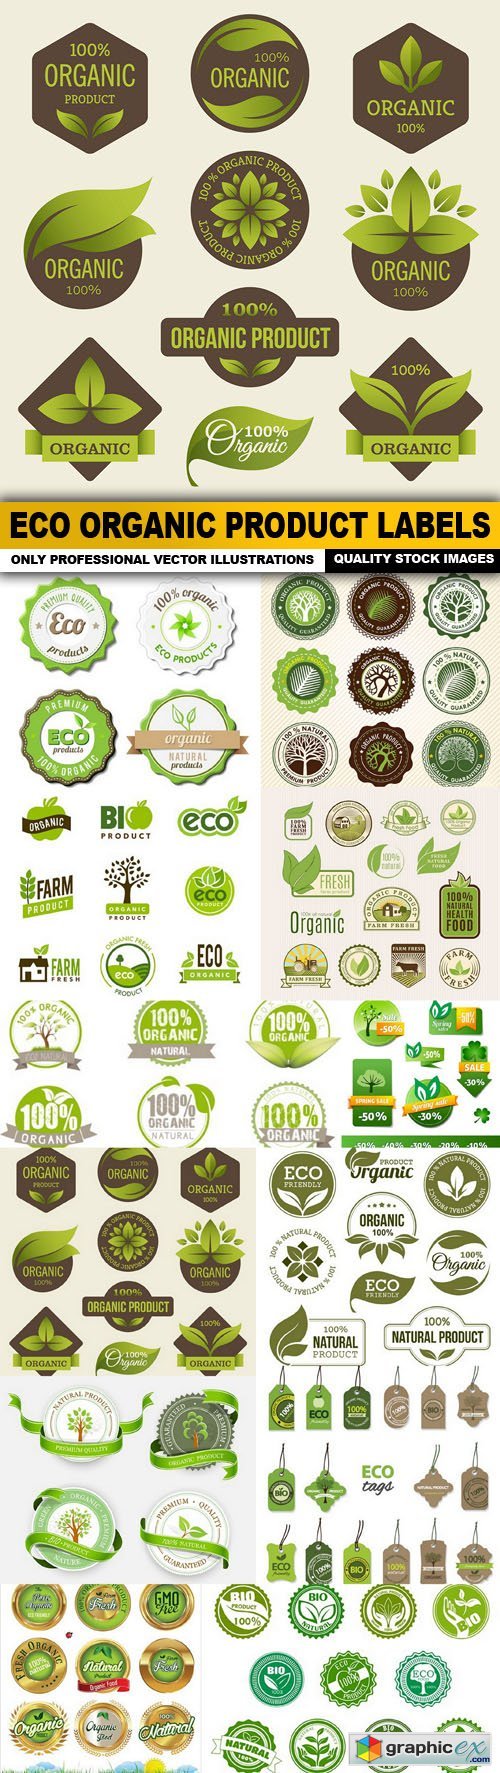 ECO Organic Product Labels - 12 Vector